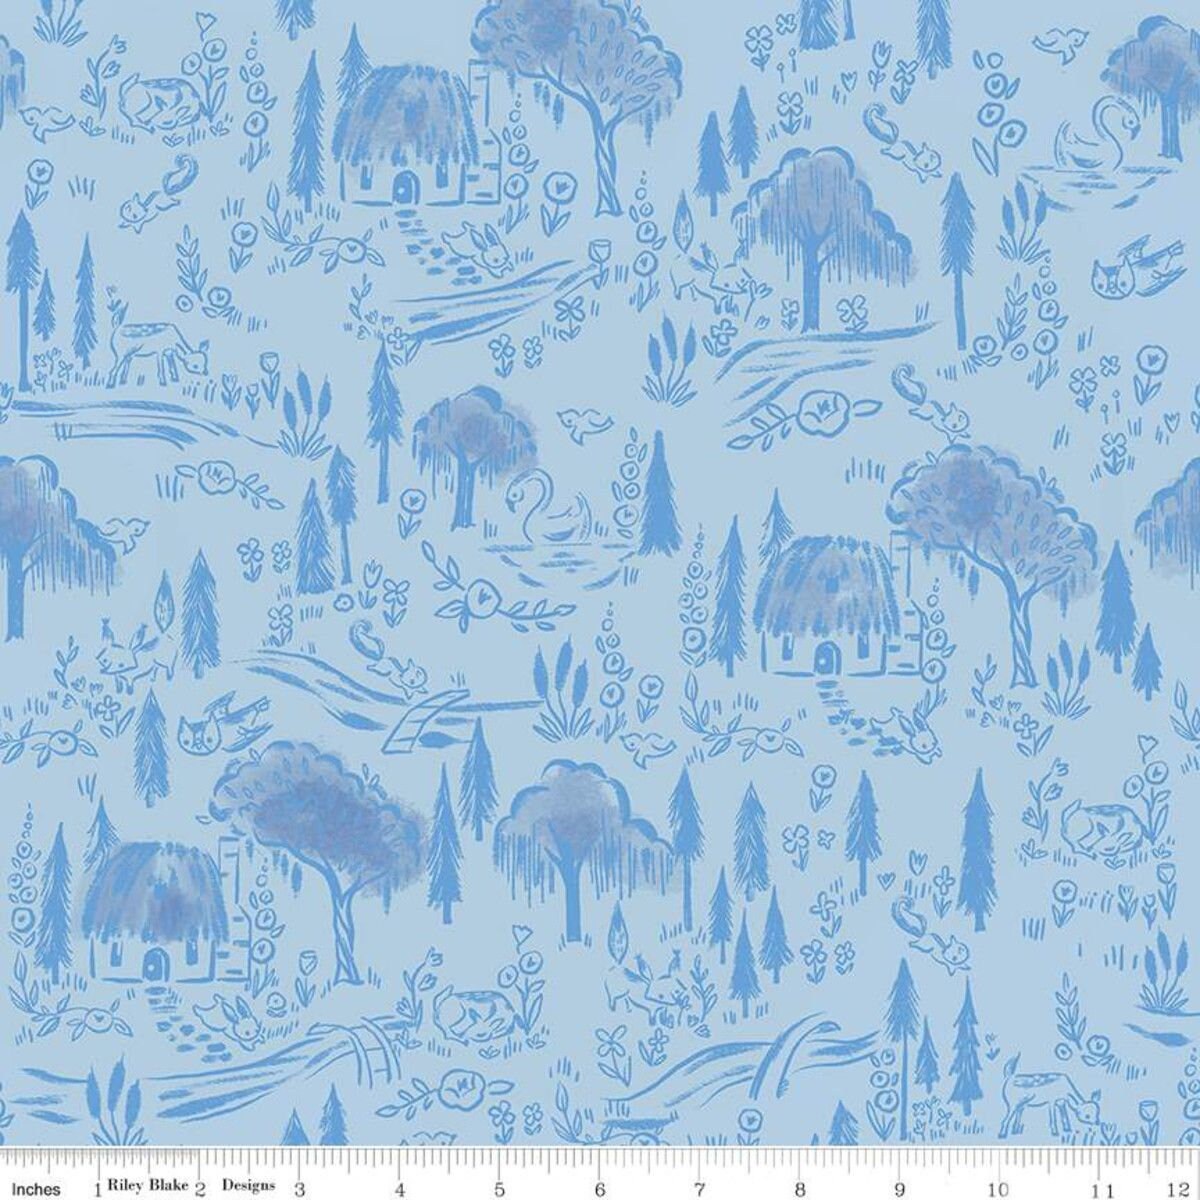 Little Brier Rose by Jill Howarth Woodland Blue C11074-BLUE Cotton Woven Fabric